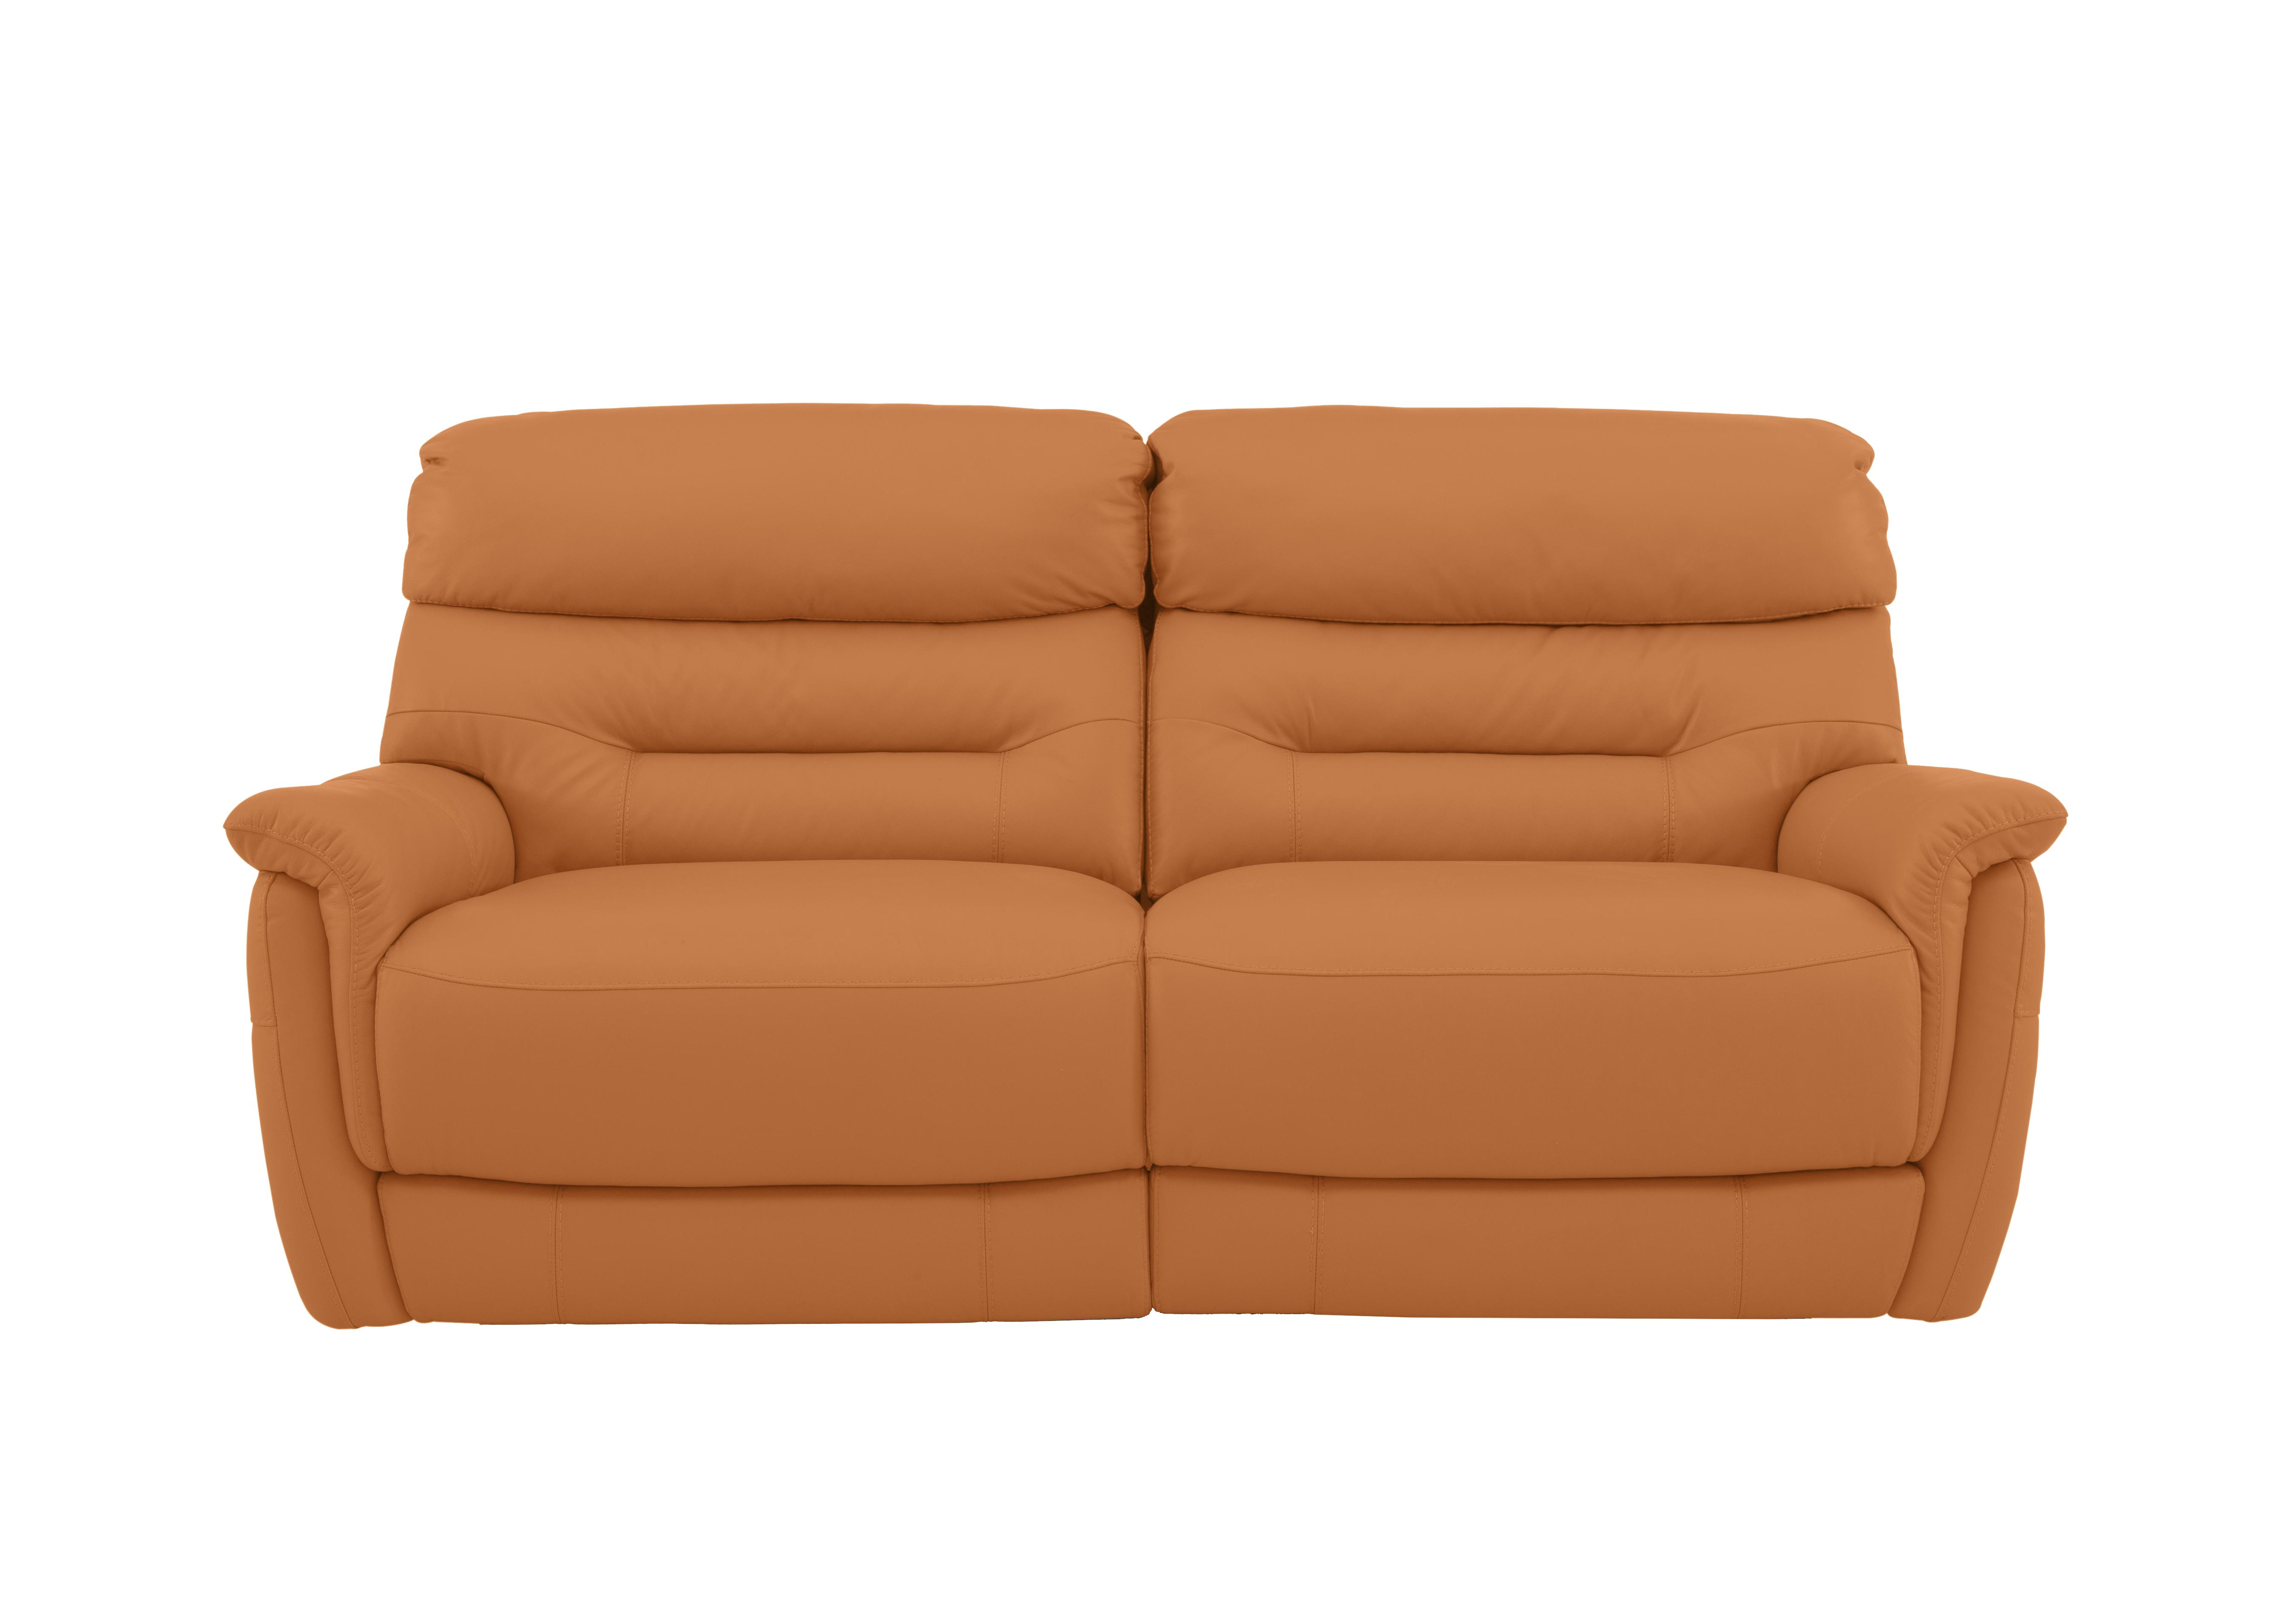 Chicago 3 Seater Leather Sofa in Bv-335e Honey Yellow on Furniture Village